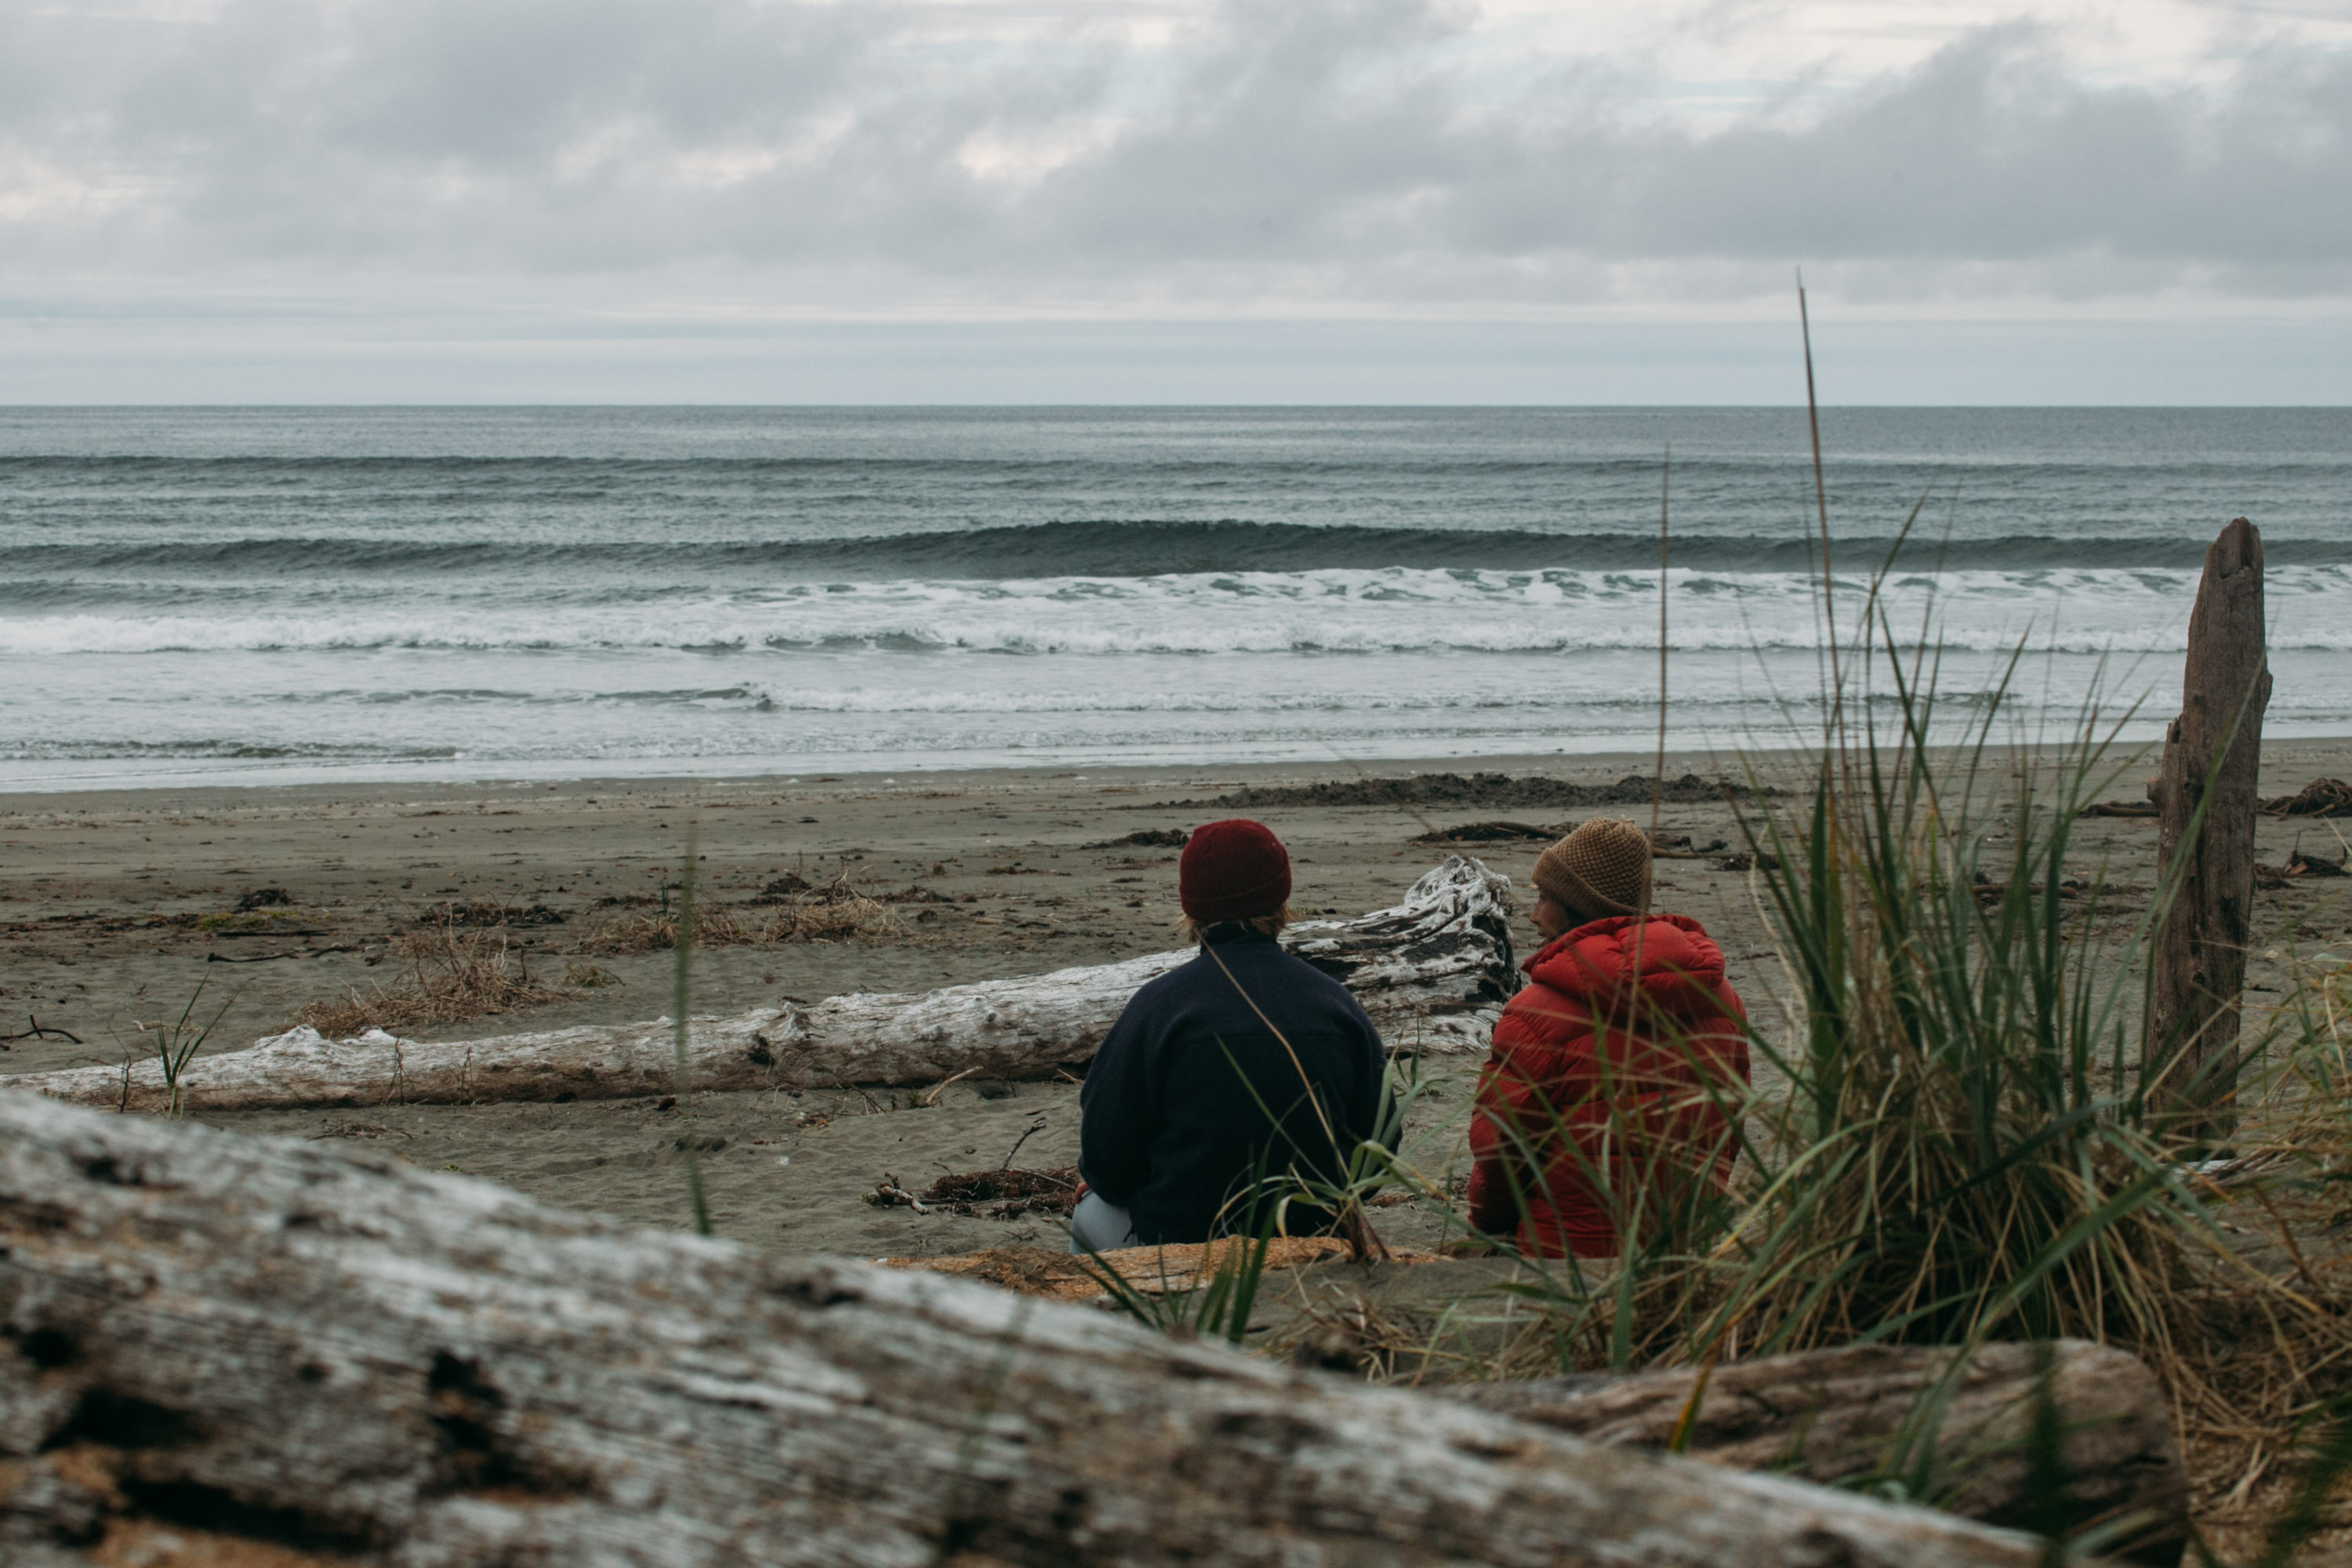 Two beach visitors are sitting on the logs watching the waves crash.